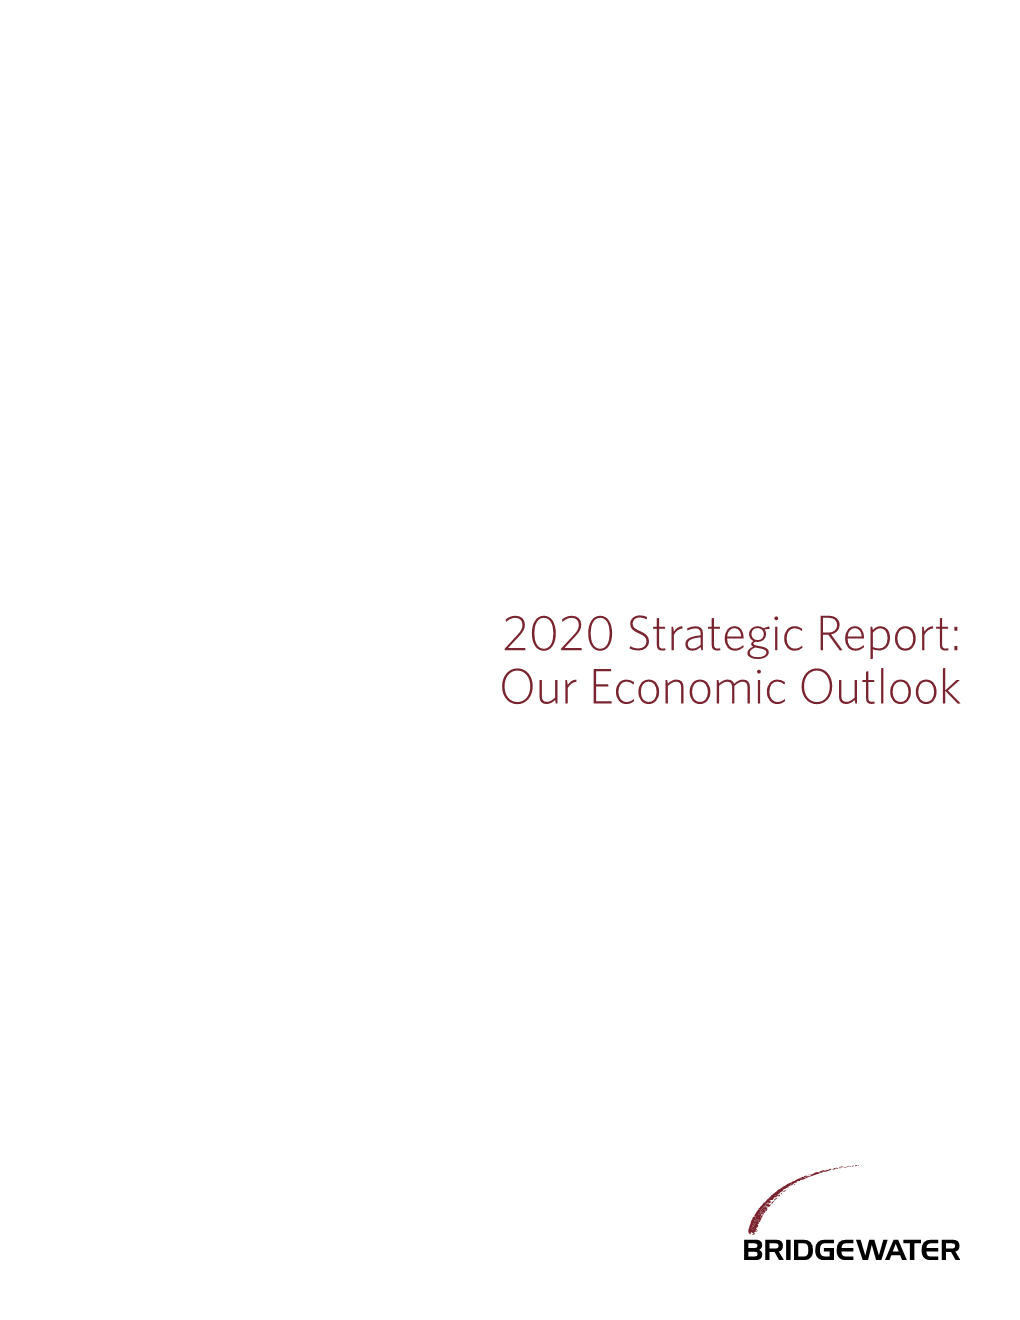 2020 Strategic Report: Our Economic Outlook 2020 Strategic Report: Our Economic Outlook